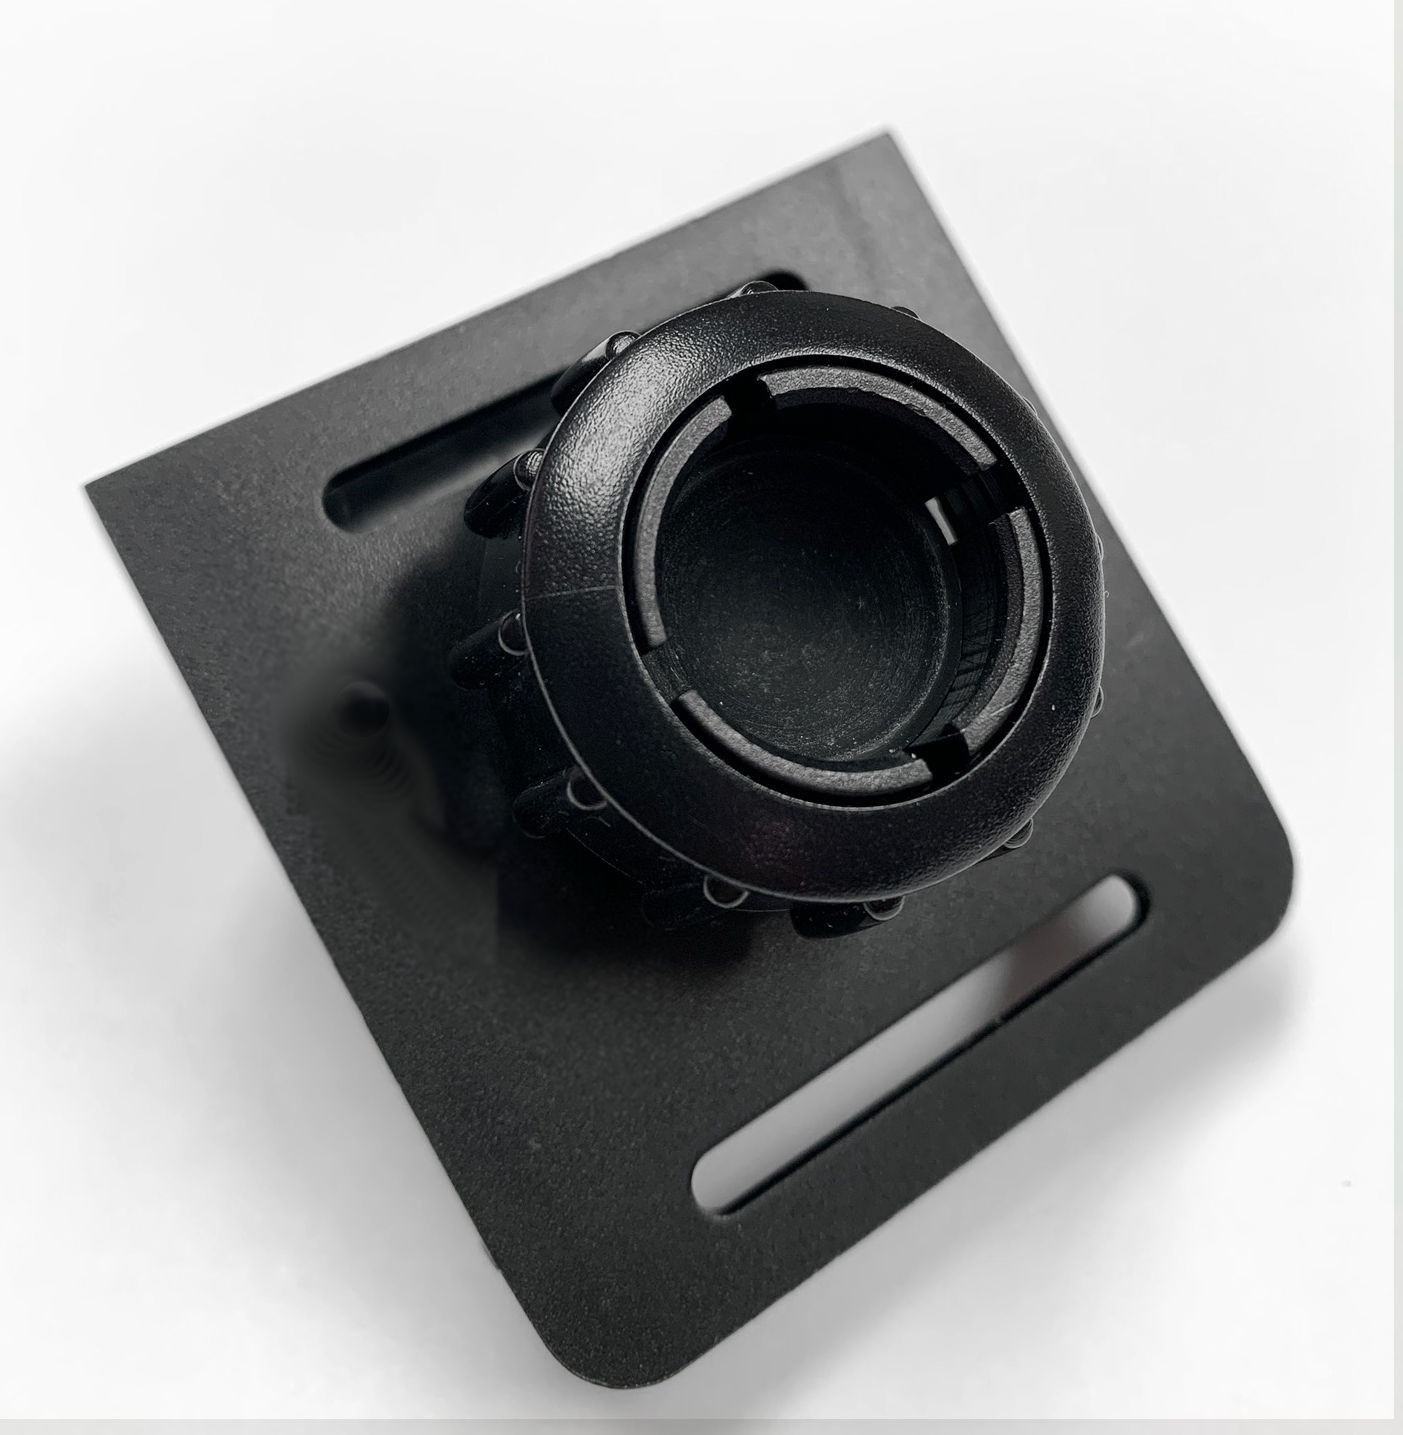 Slide Mount for use with ball-tip Garmin Mounts